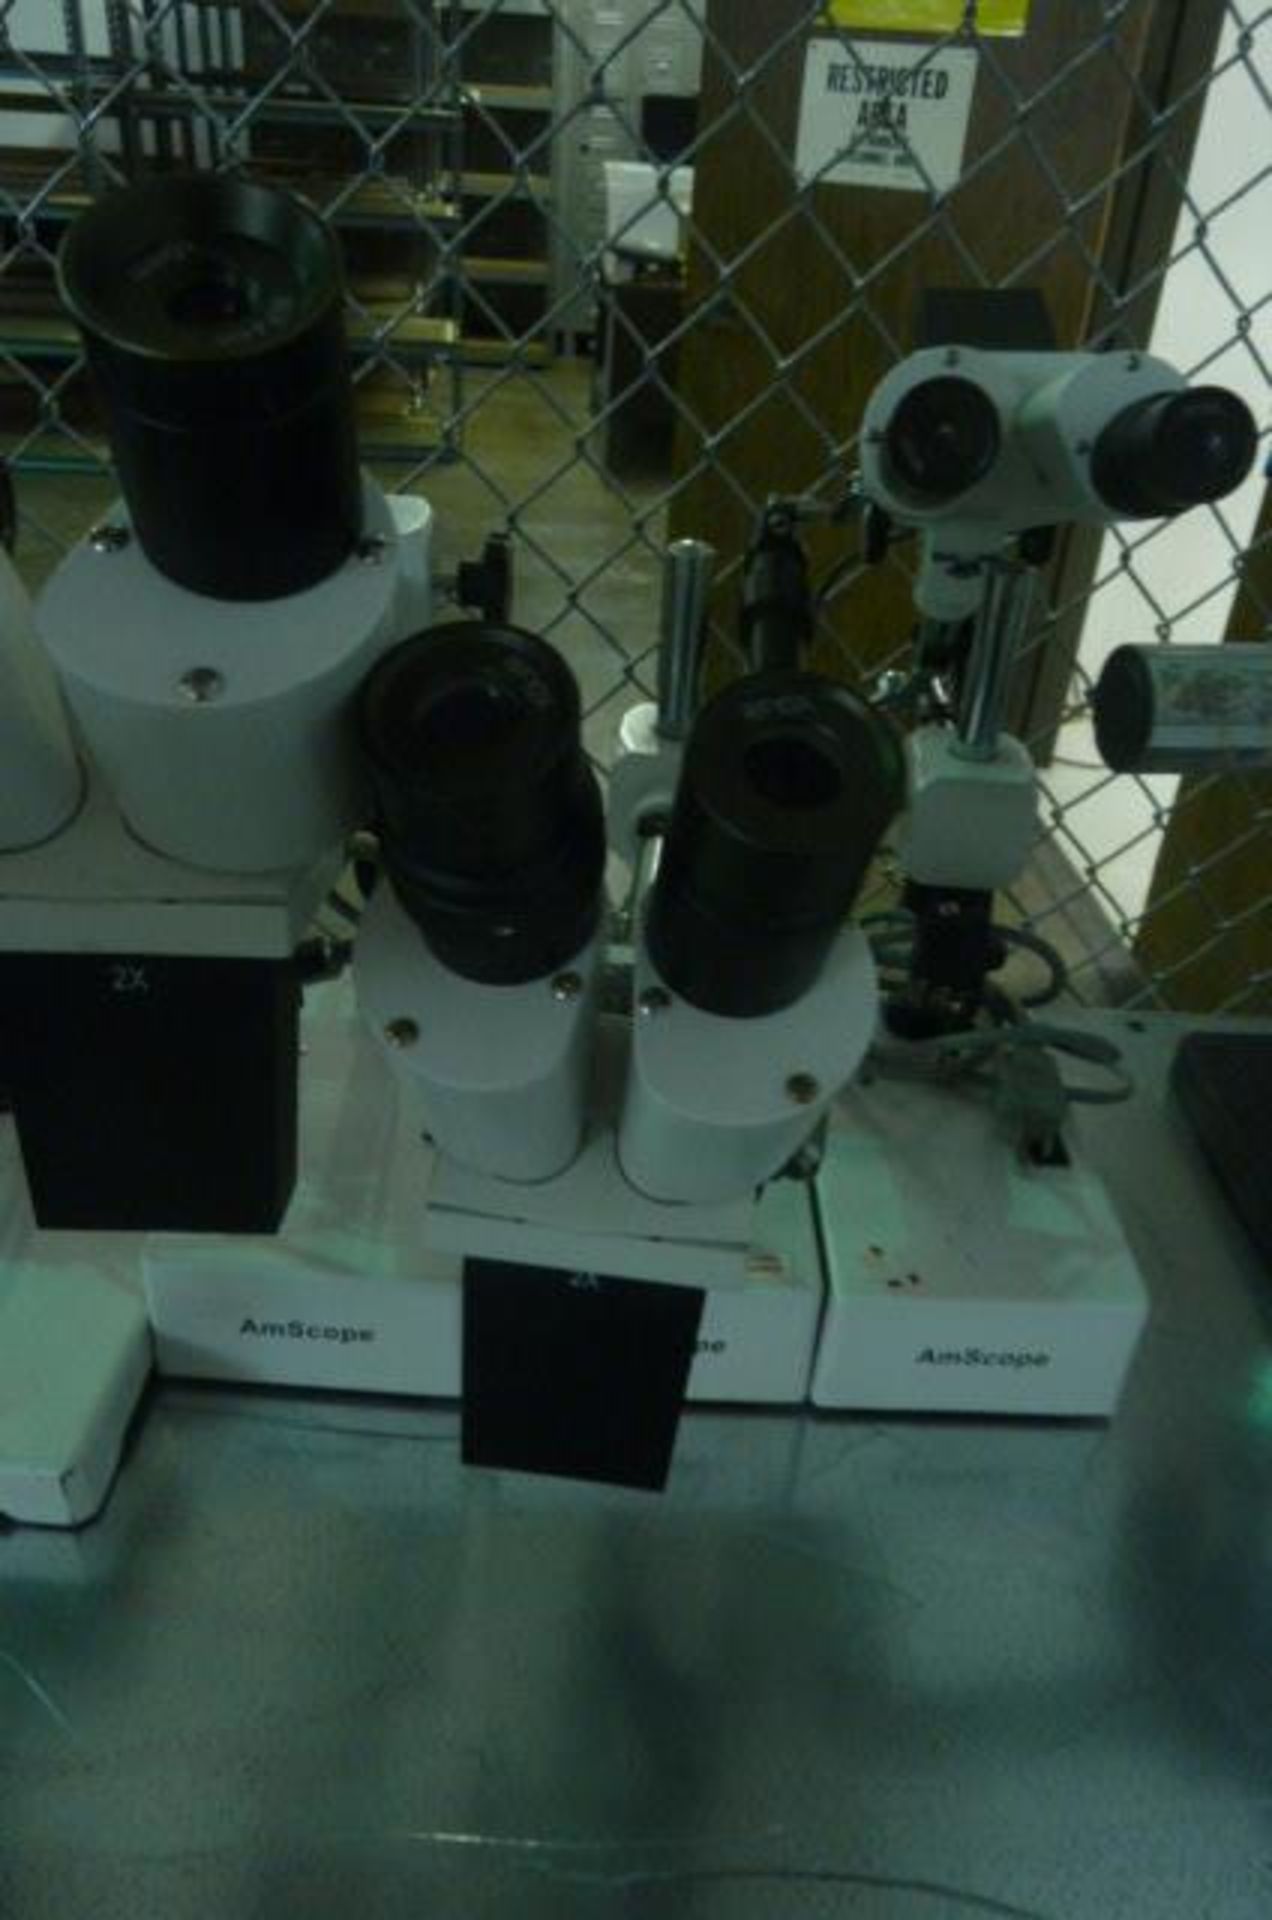 Microscopes by Scienscope, Aven, AmScope, SteroZoom SZ-4 - Image 4 of 8